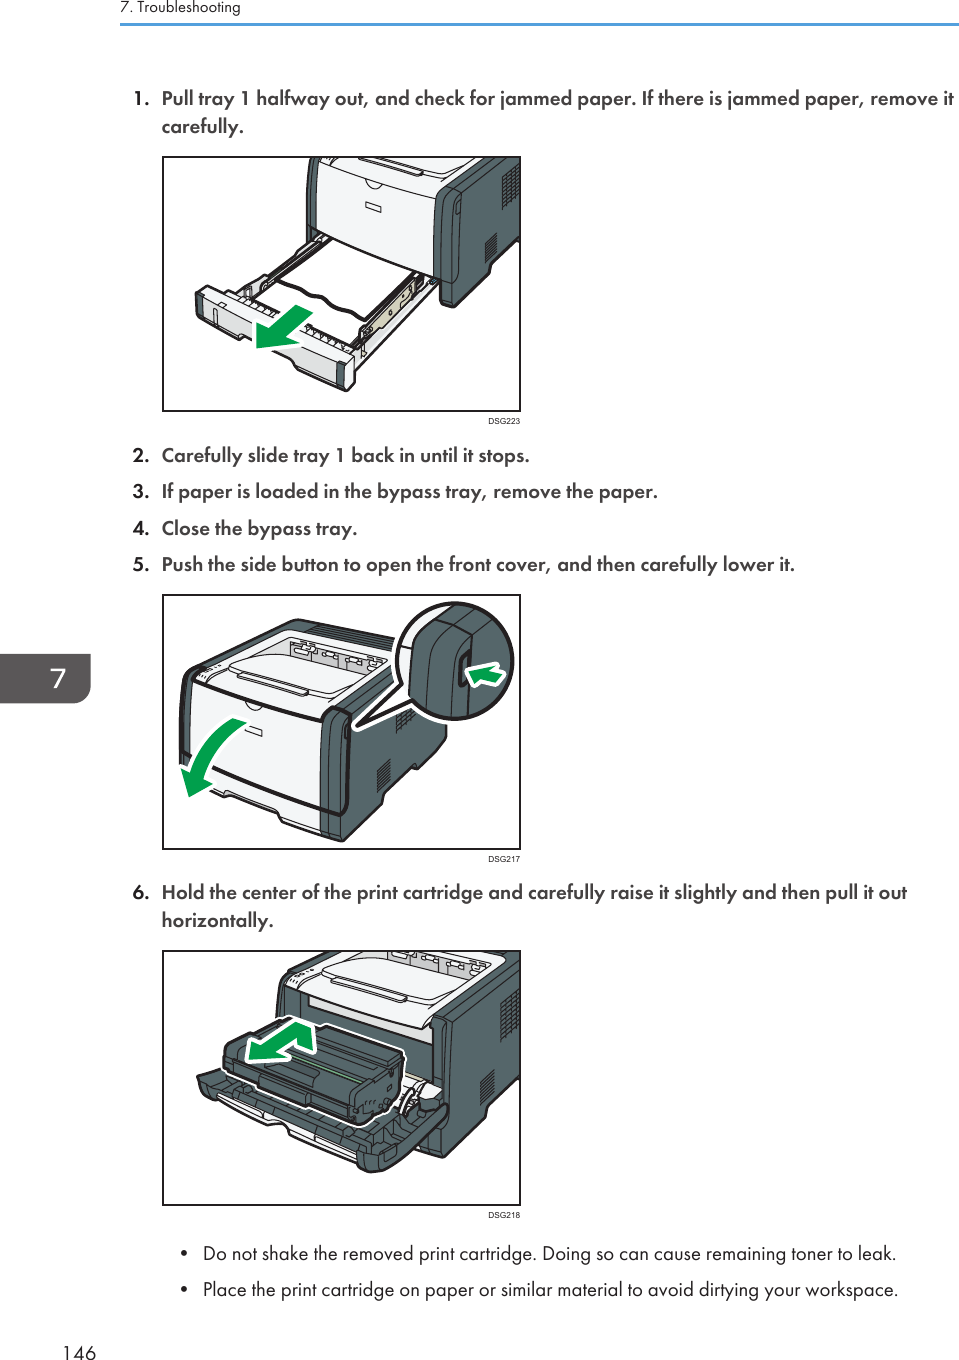 1. Pull tray 1 halfway out, and check for jammed paper. If there is jammed paper, remove itcarefully.DSG2232. Carefully slide tray 1 back in until it stops.3. If paper is loaded in the bypass tray, remove the paper.4. Close the bypass tray.5. Push the side button to open the front cover, and then carefully lower it.DSG2176. Hold the center of the print cartridge and carefully raise it slightly and then pull it outhorizontally.DSG218• Do not shake the removed print cartridge. Doing so can cause remaining toner to leak.• Place the print cartridge on paper or similar material to avoid dirtying your workspace.7. Troubleshooting146